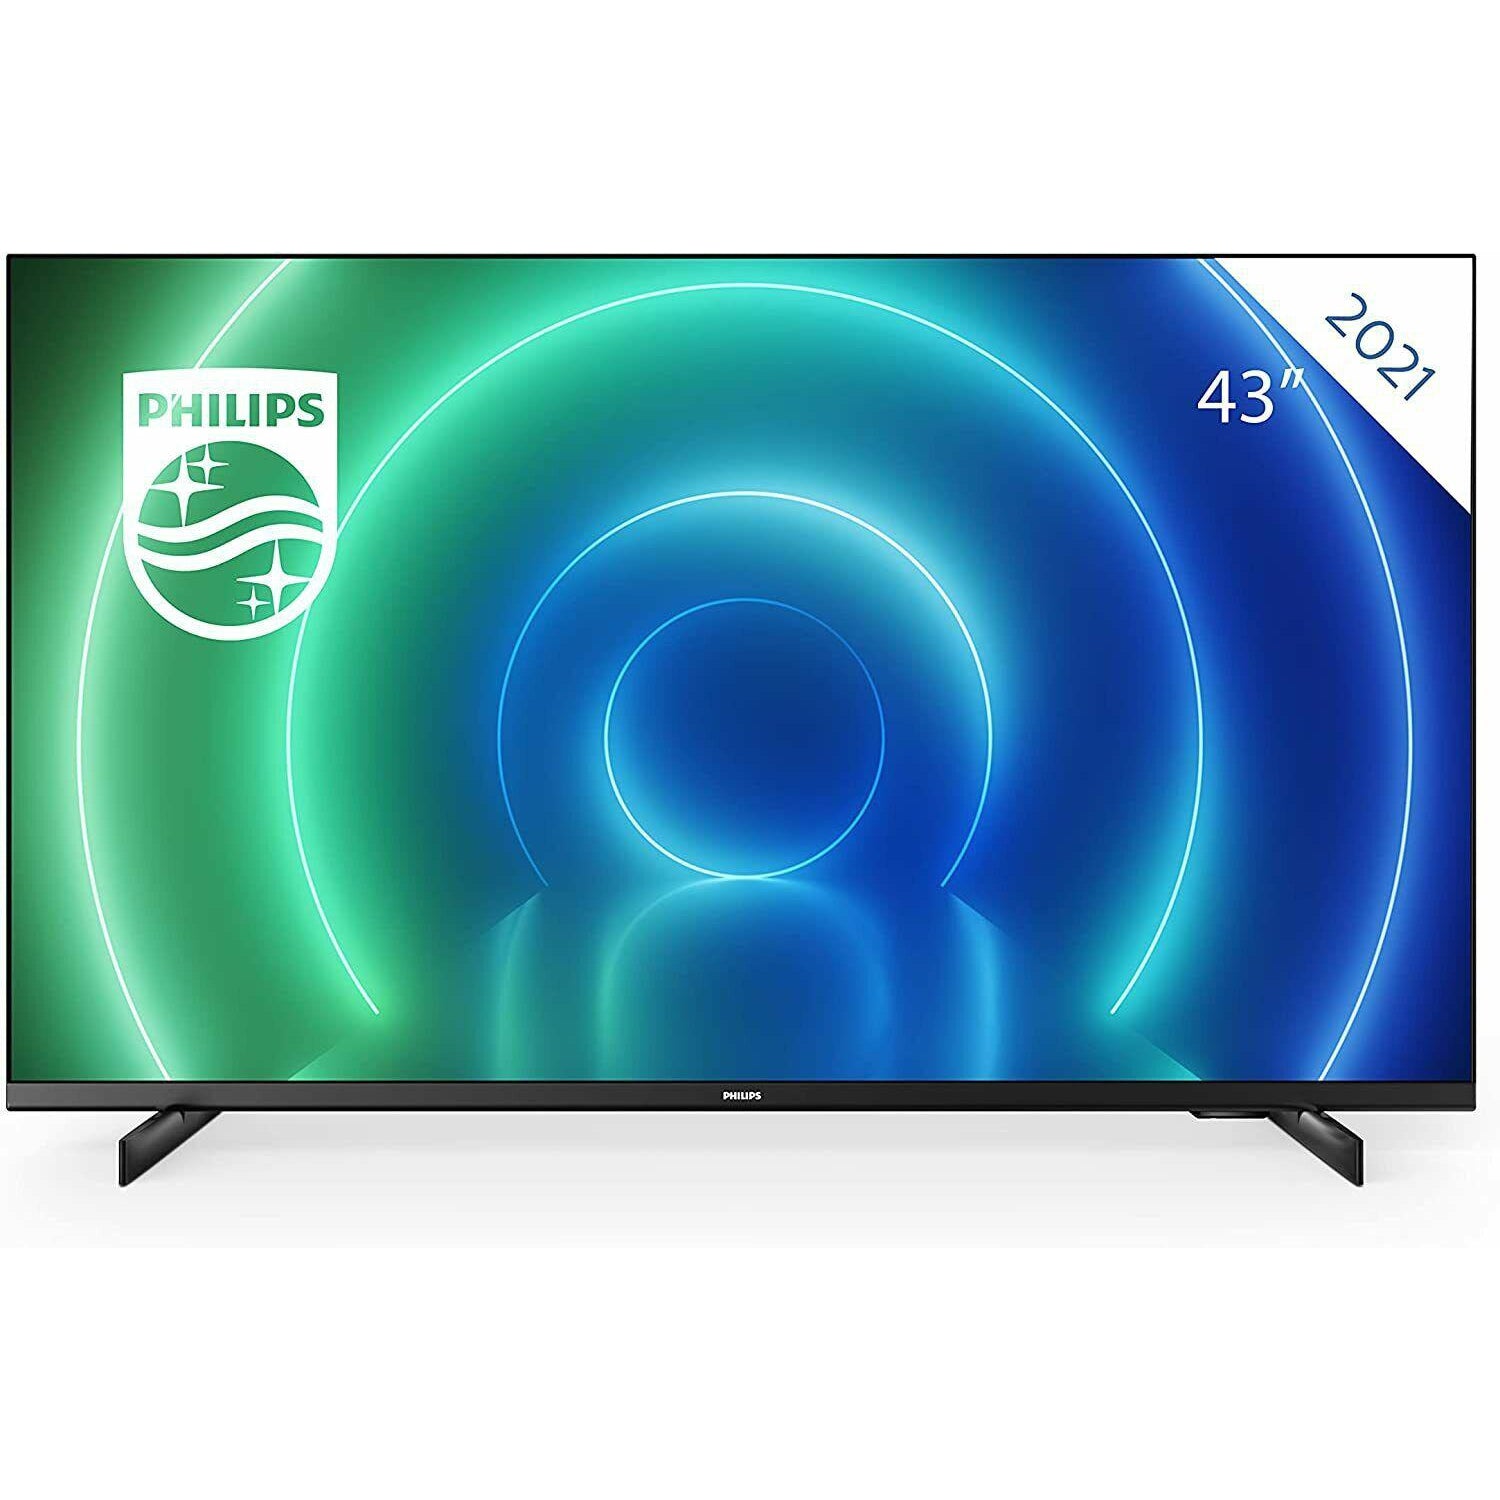 Refurbished Philips 43 Inch 43PUS7506 Smart 4K UHD HDR LED Freeview TV - Refurbished Excellent